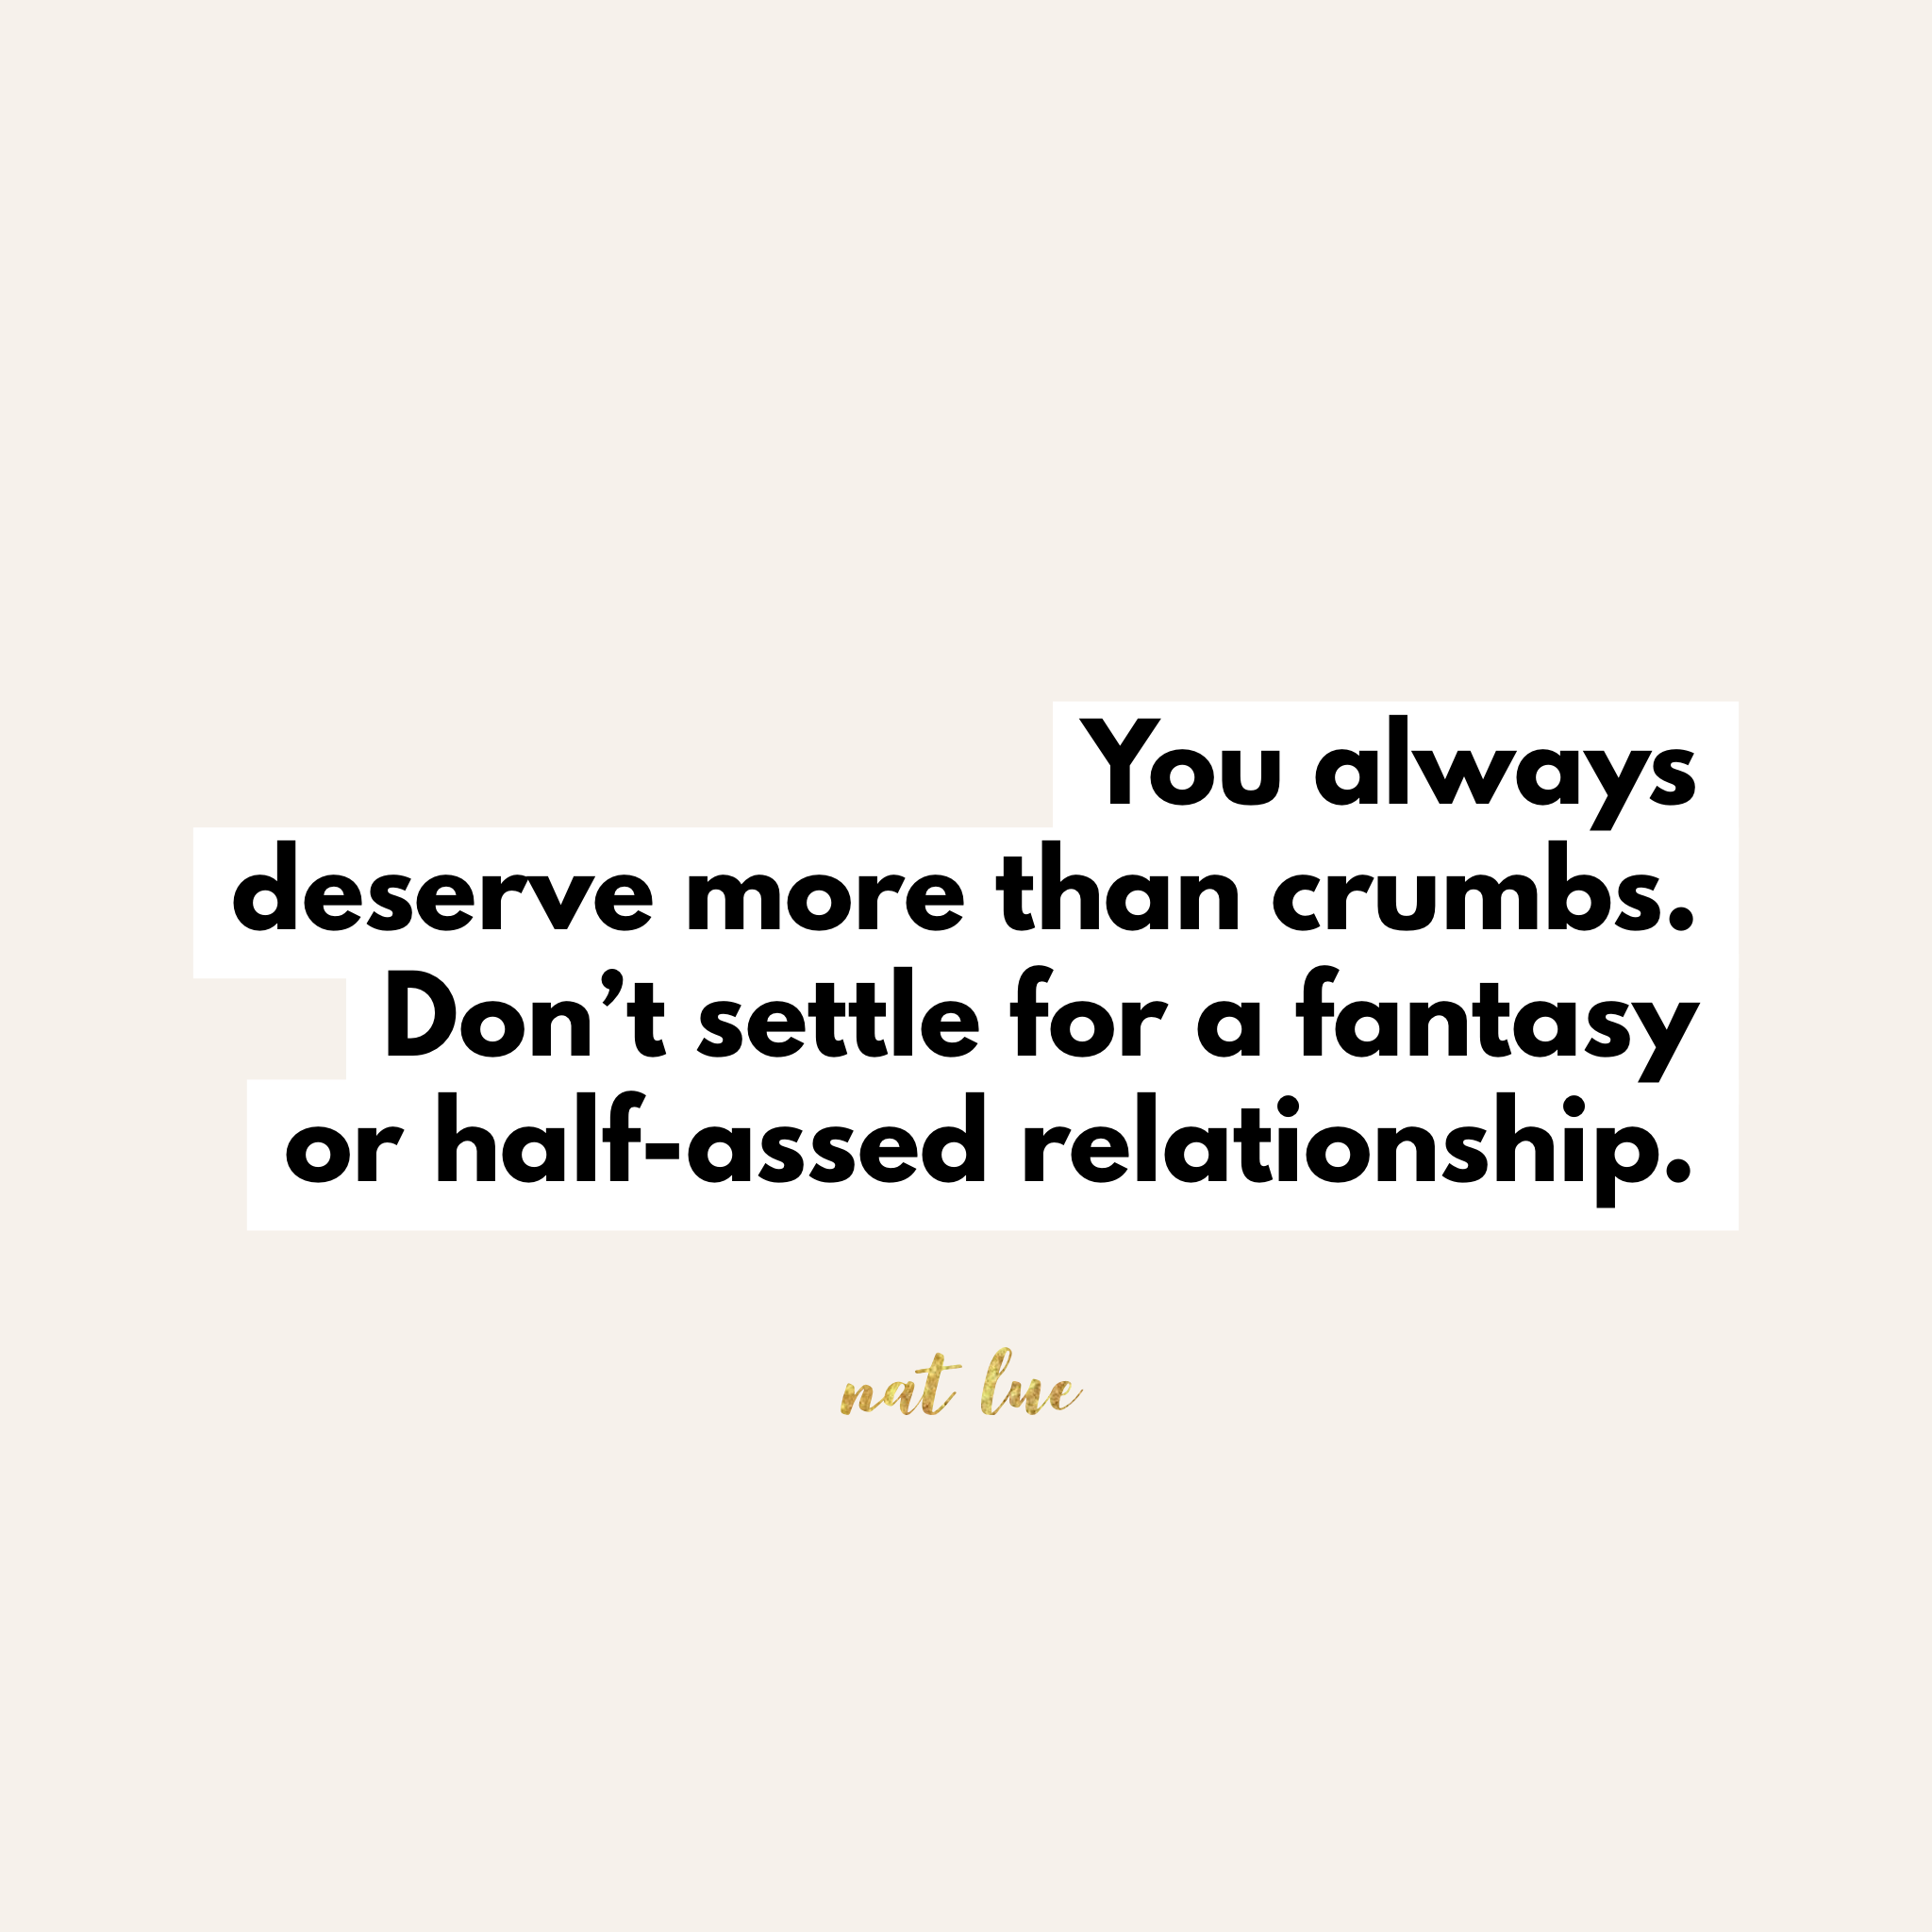 Letting go of a relationship that doesn't exist quote. You always deserve more than crumbs. Do't settle for a fantasy or half-assed relationship.